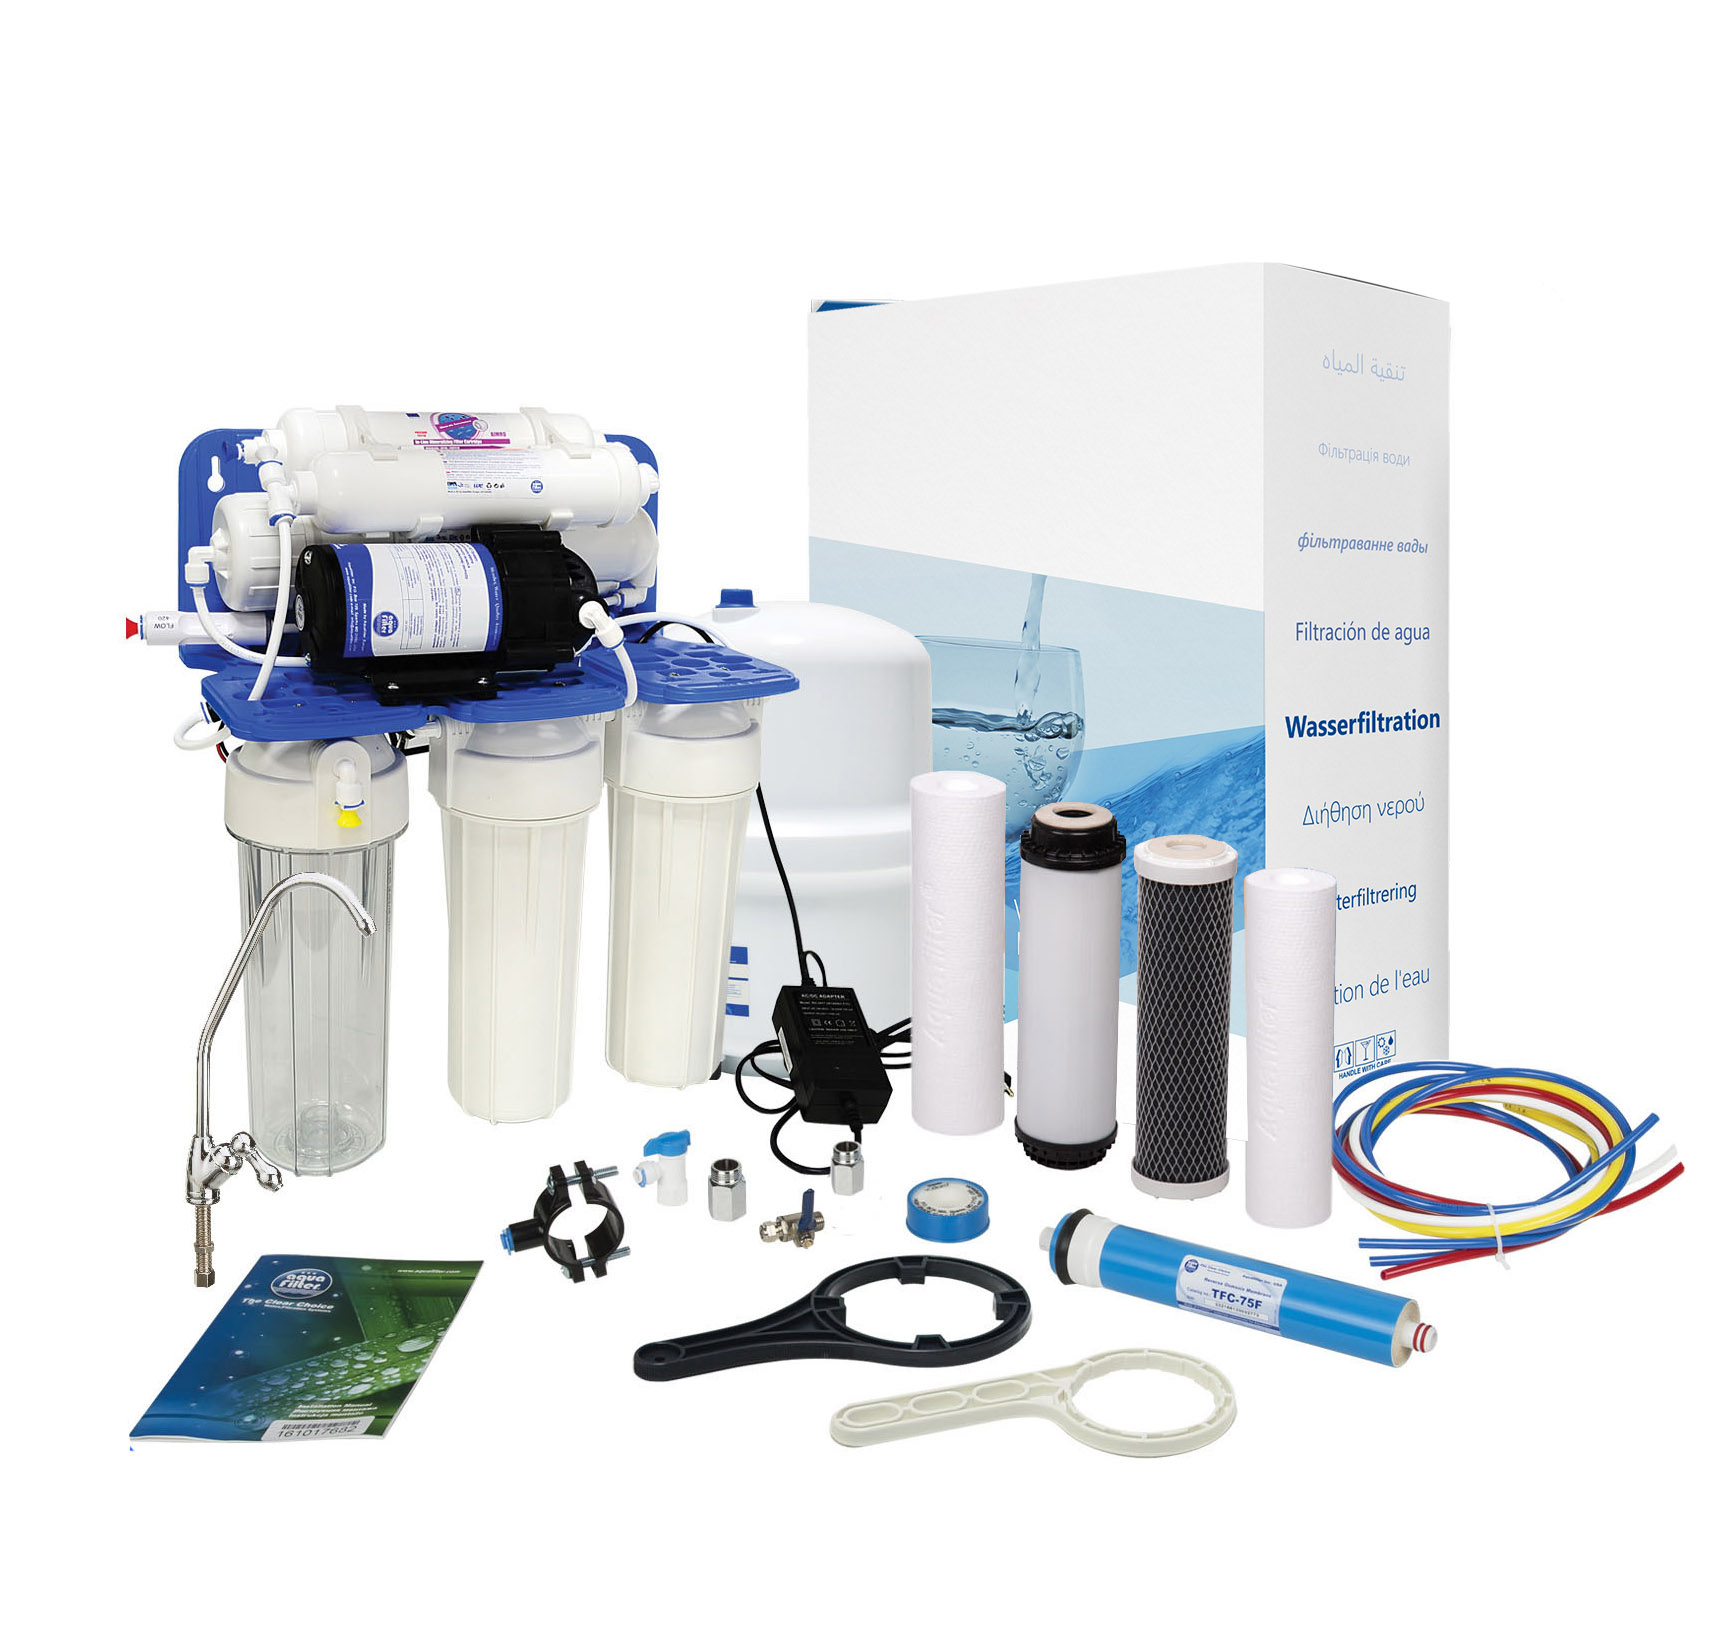 https://www.sunsource.com.mt/shop/household/reverse-osmosis/6-stage-aquafilter-ro-with-pump-tank-faucet/